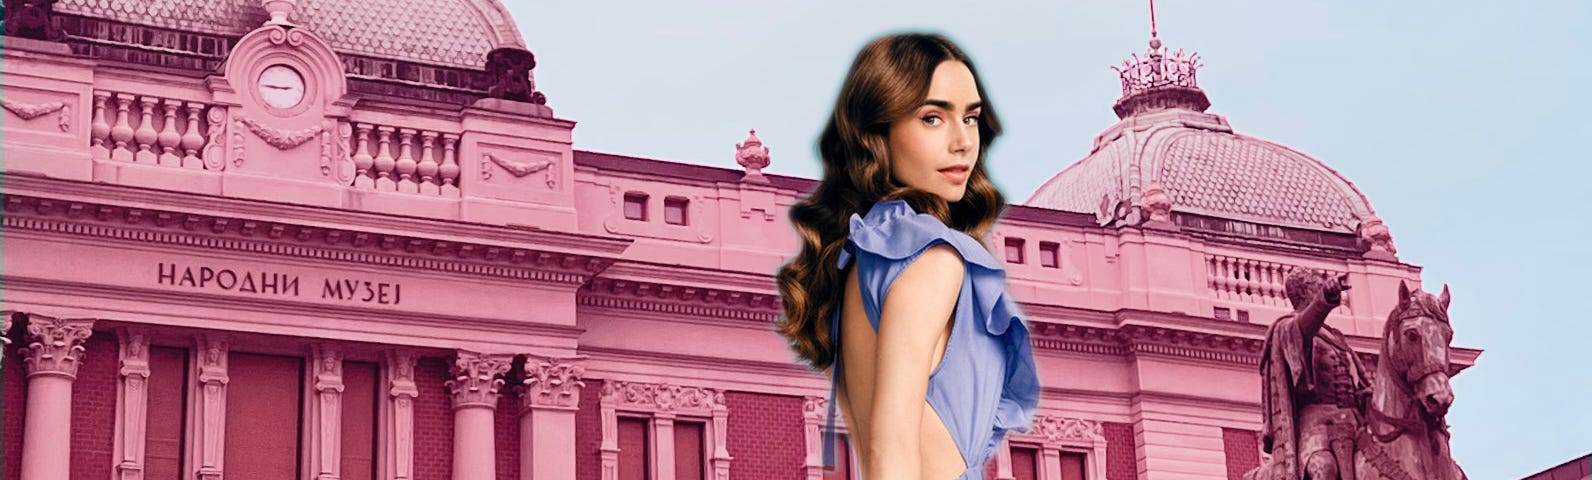 Emily, the star of “Emily in Belgrade” photoshopped into a pink-washed photo of Republic Square in Belgrade, Serbia